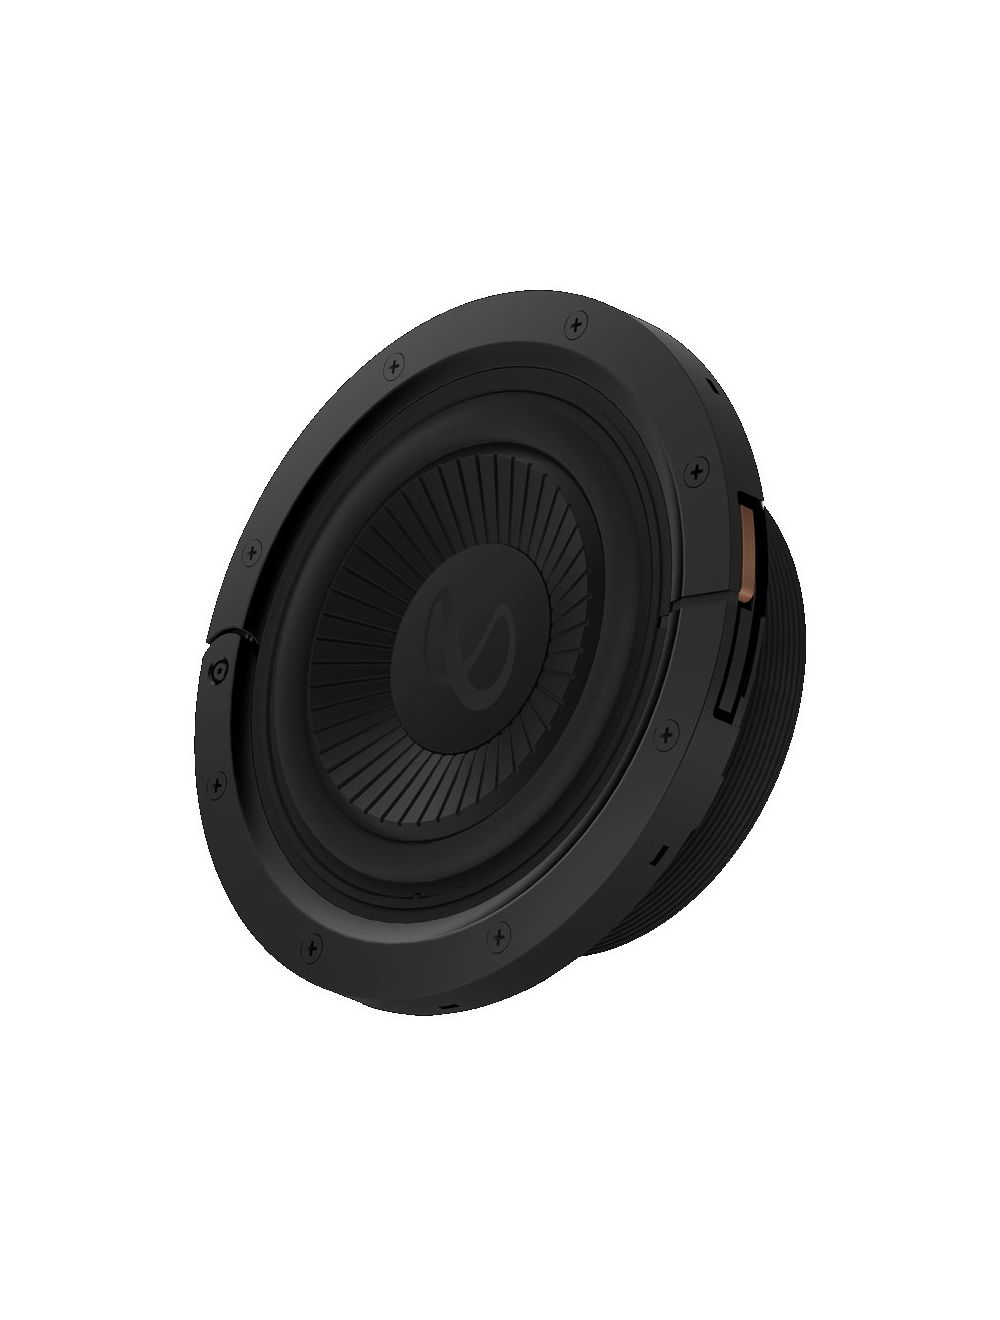 Infinity Ref-Flex8d - Reference Series 8 Dual Voice Coil Car Subwoofer (Discontinuted)